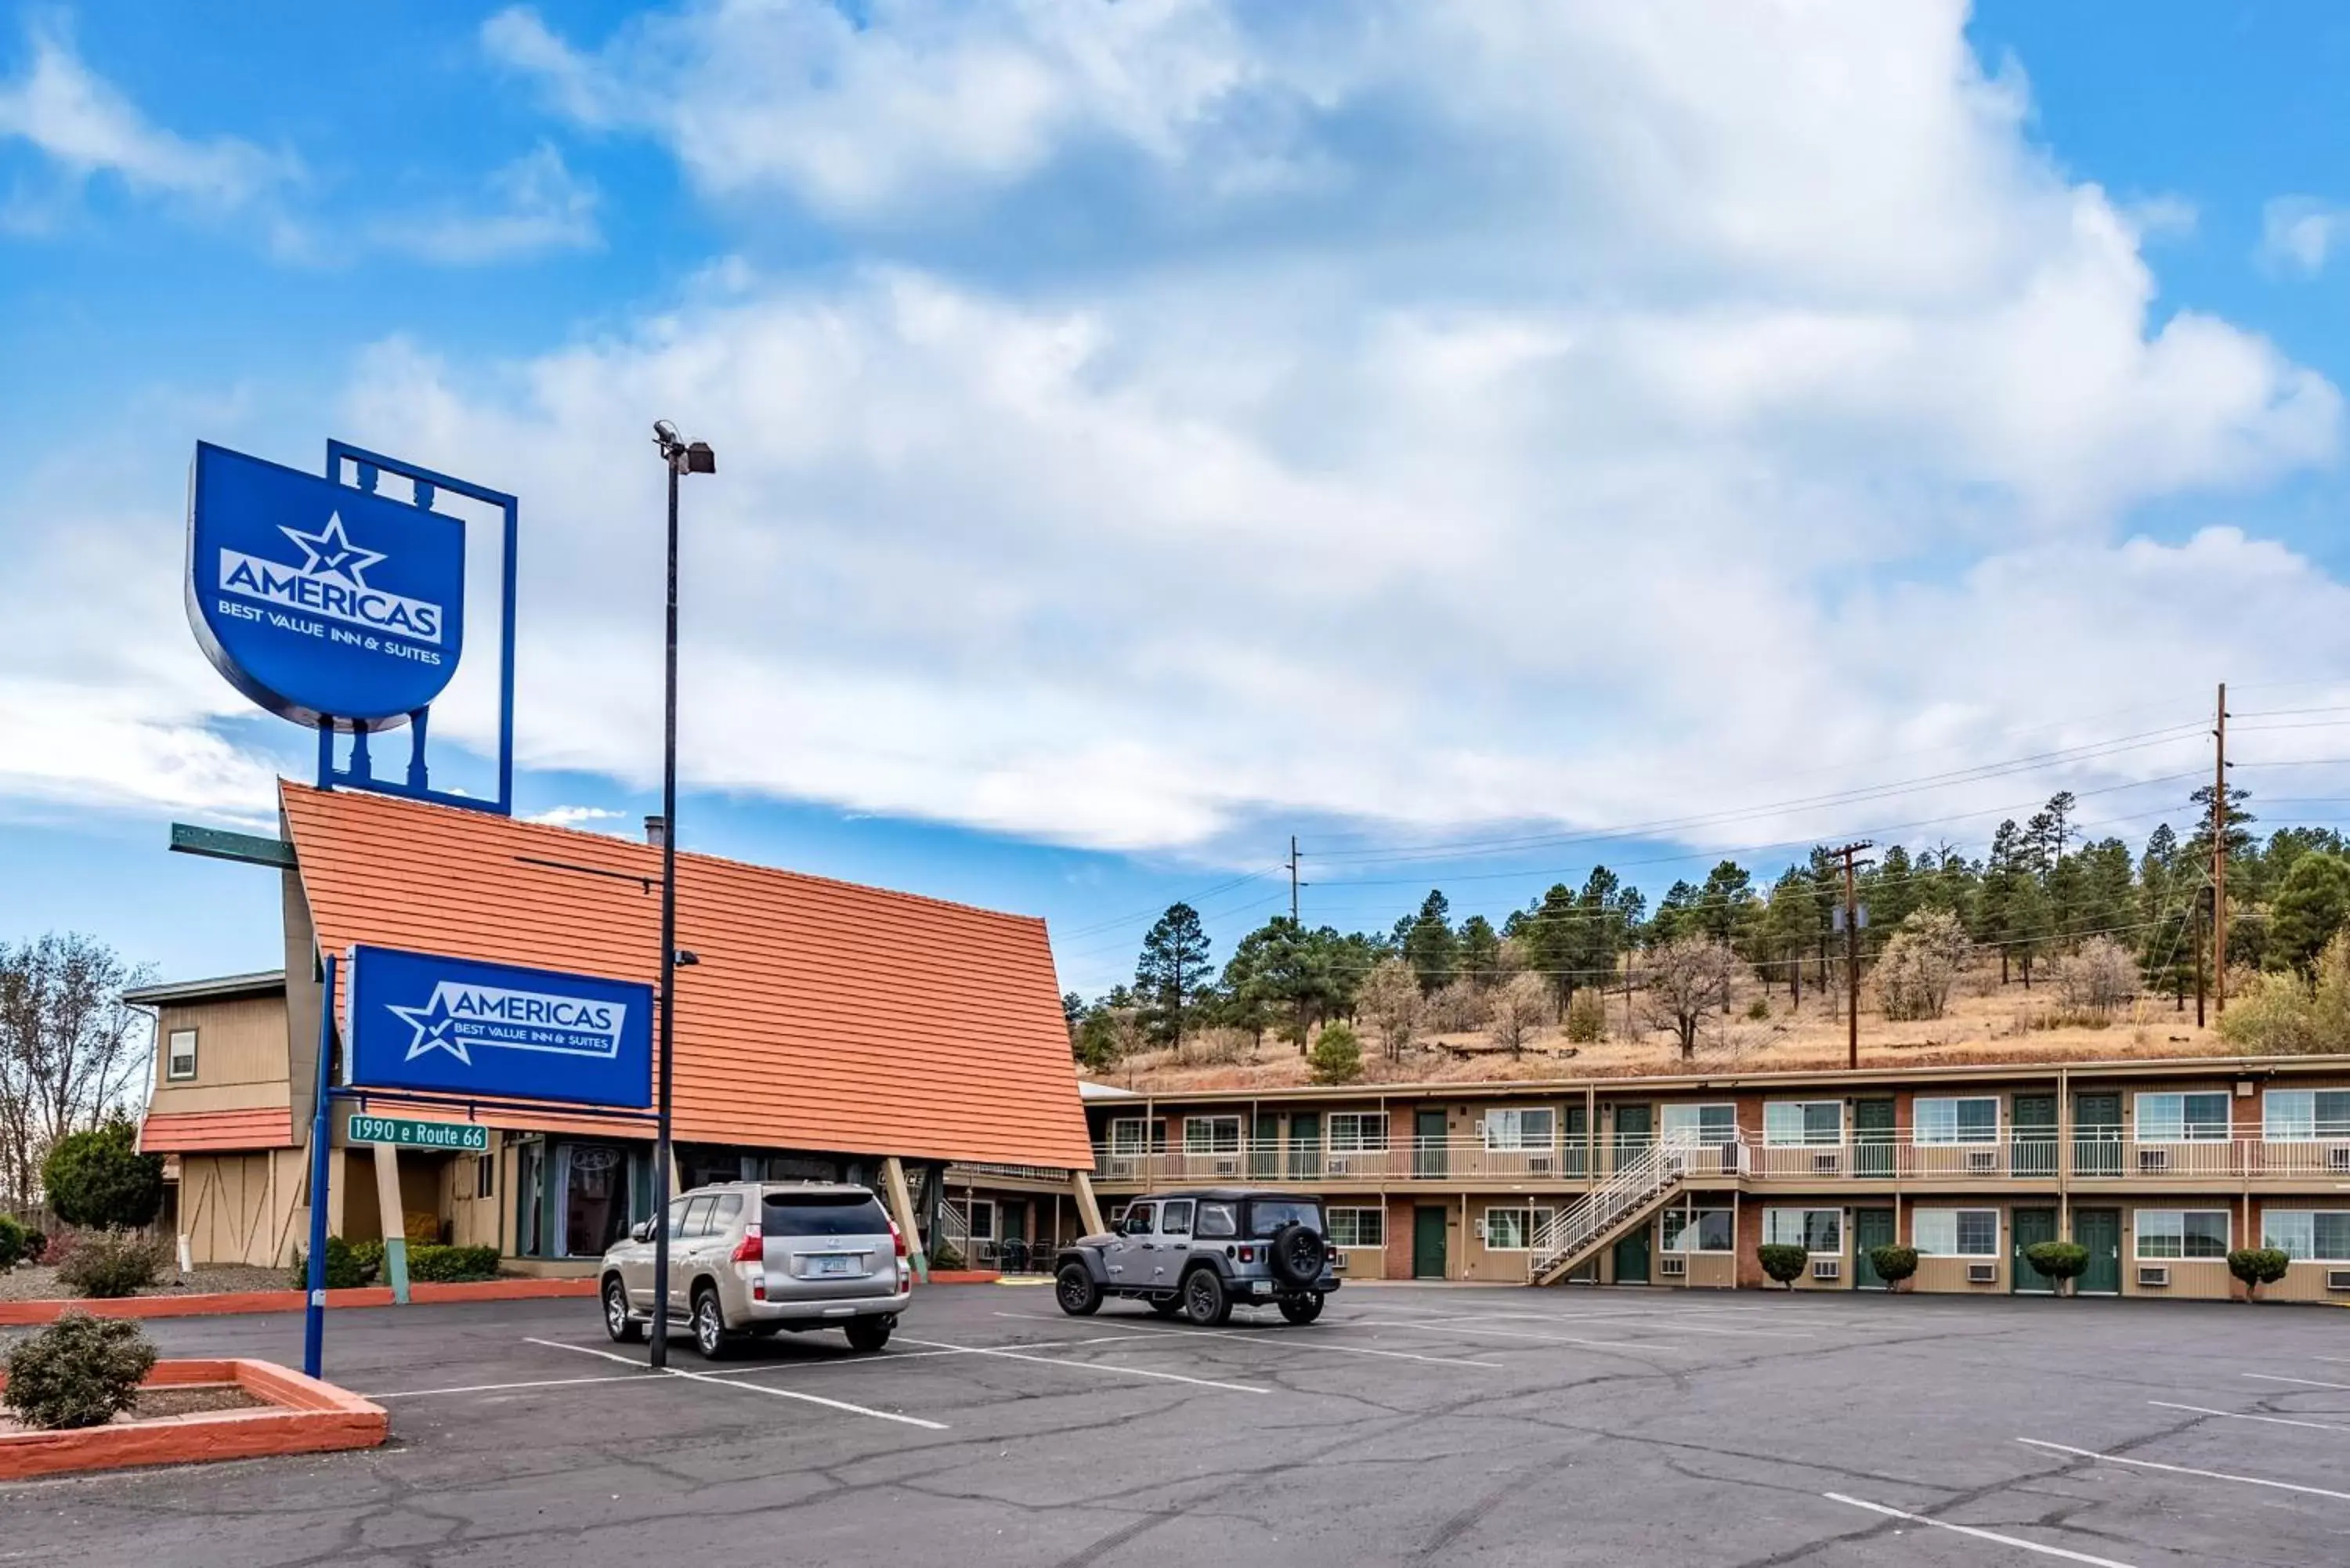 Property Building in Americas Best Value Inn and Suites Flagstaff